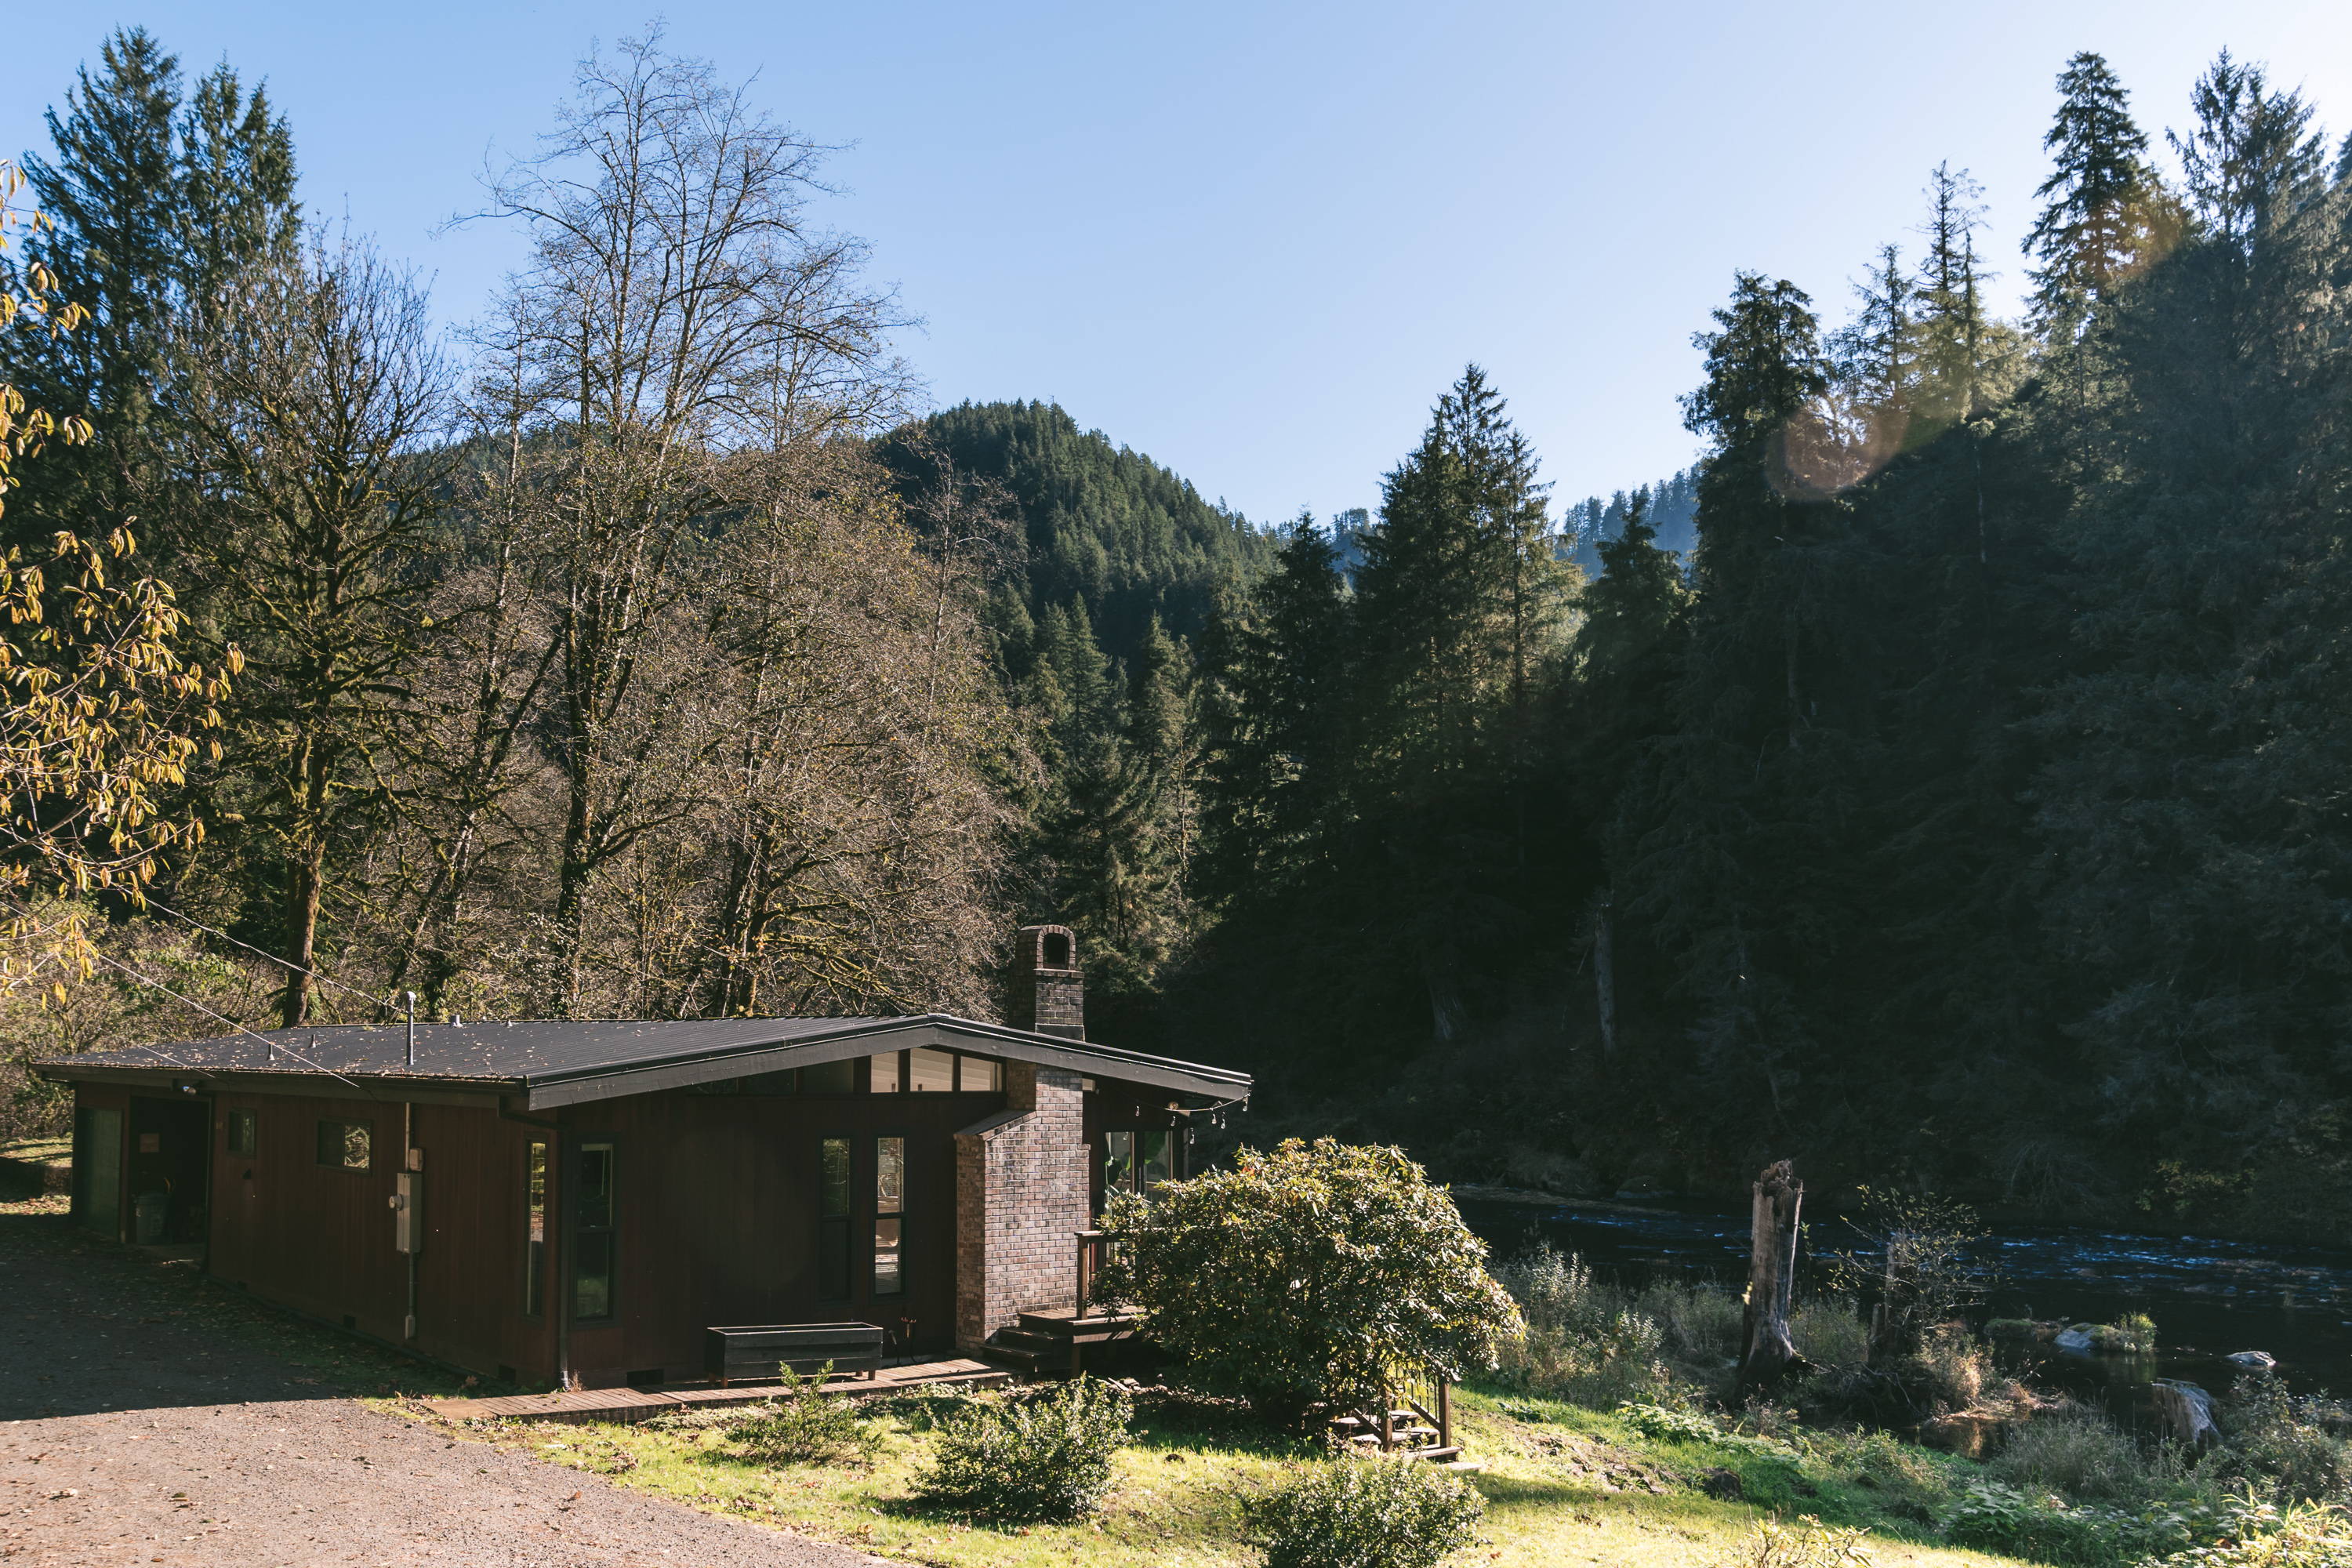 Airbnb cabin in Tillamook oregon in the mountains. 